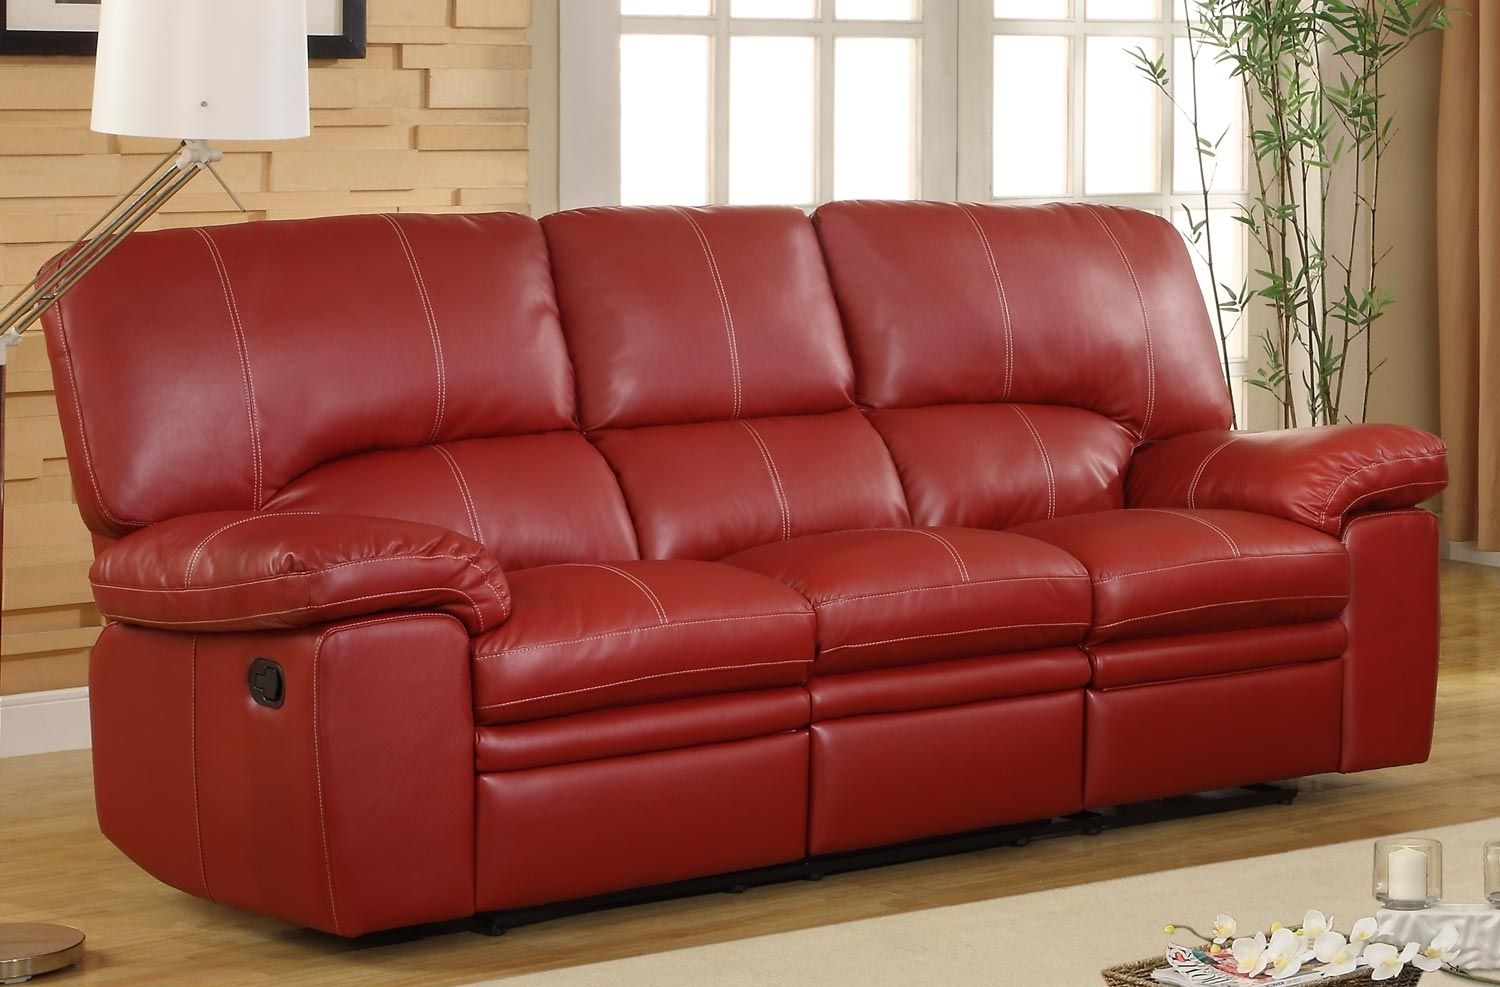 2 pc red leather reclining sofa & love set